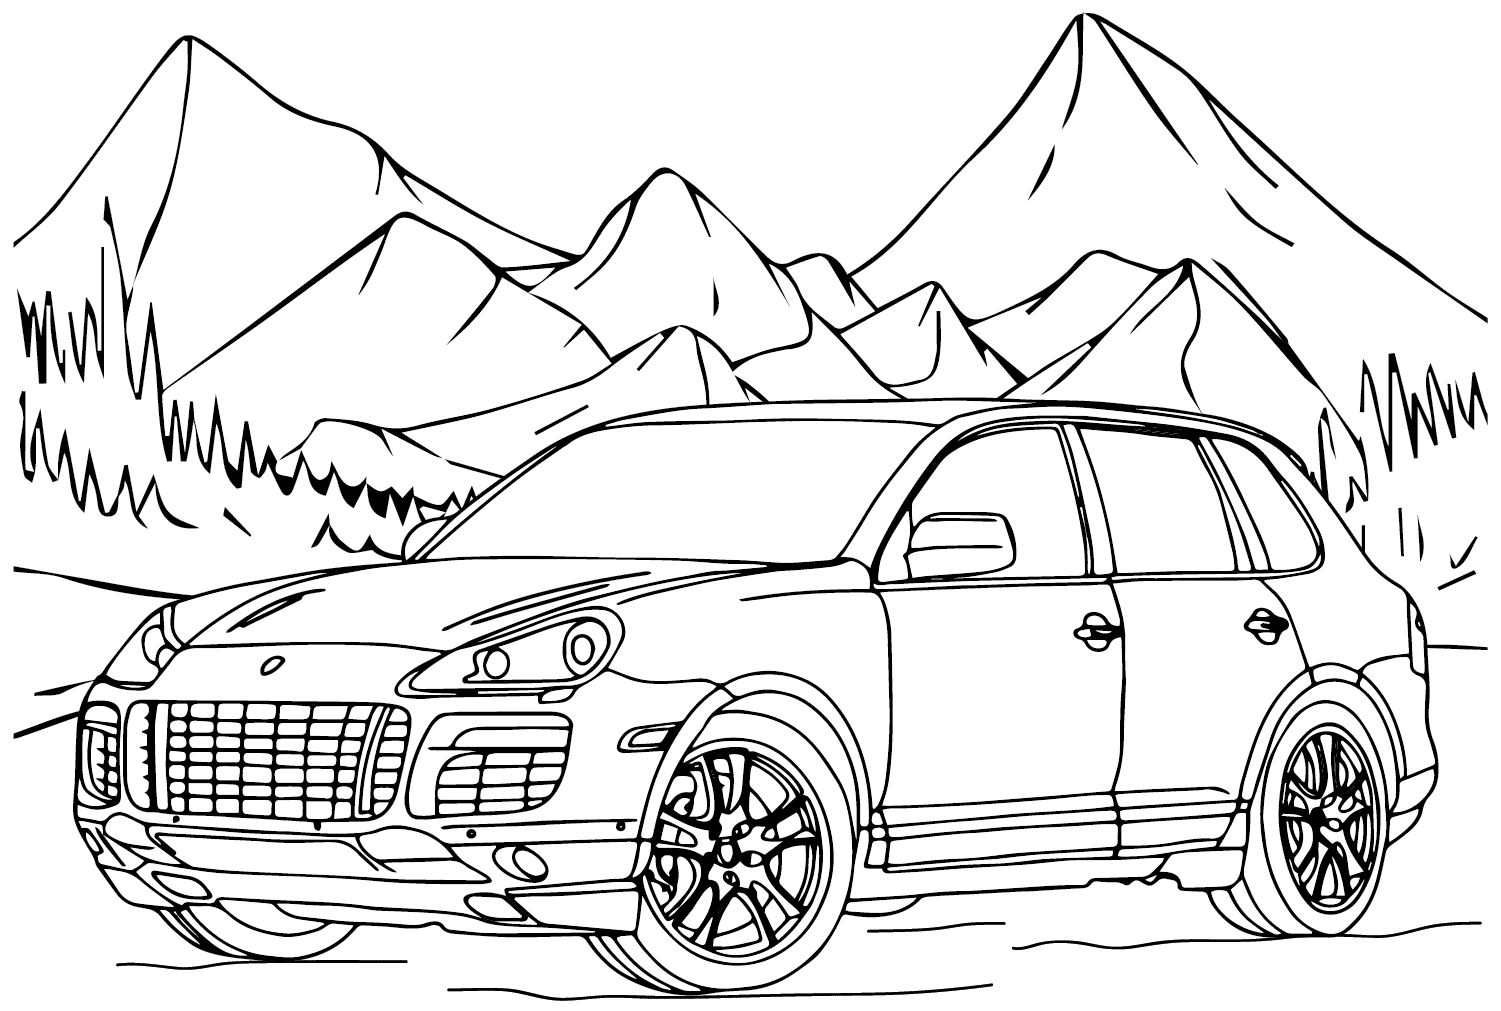 Porsche Cayenne (957) Turbo S Coloring Page from Porsche